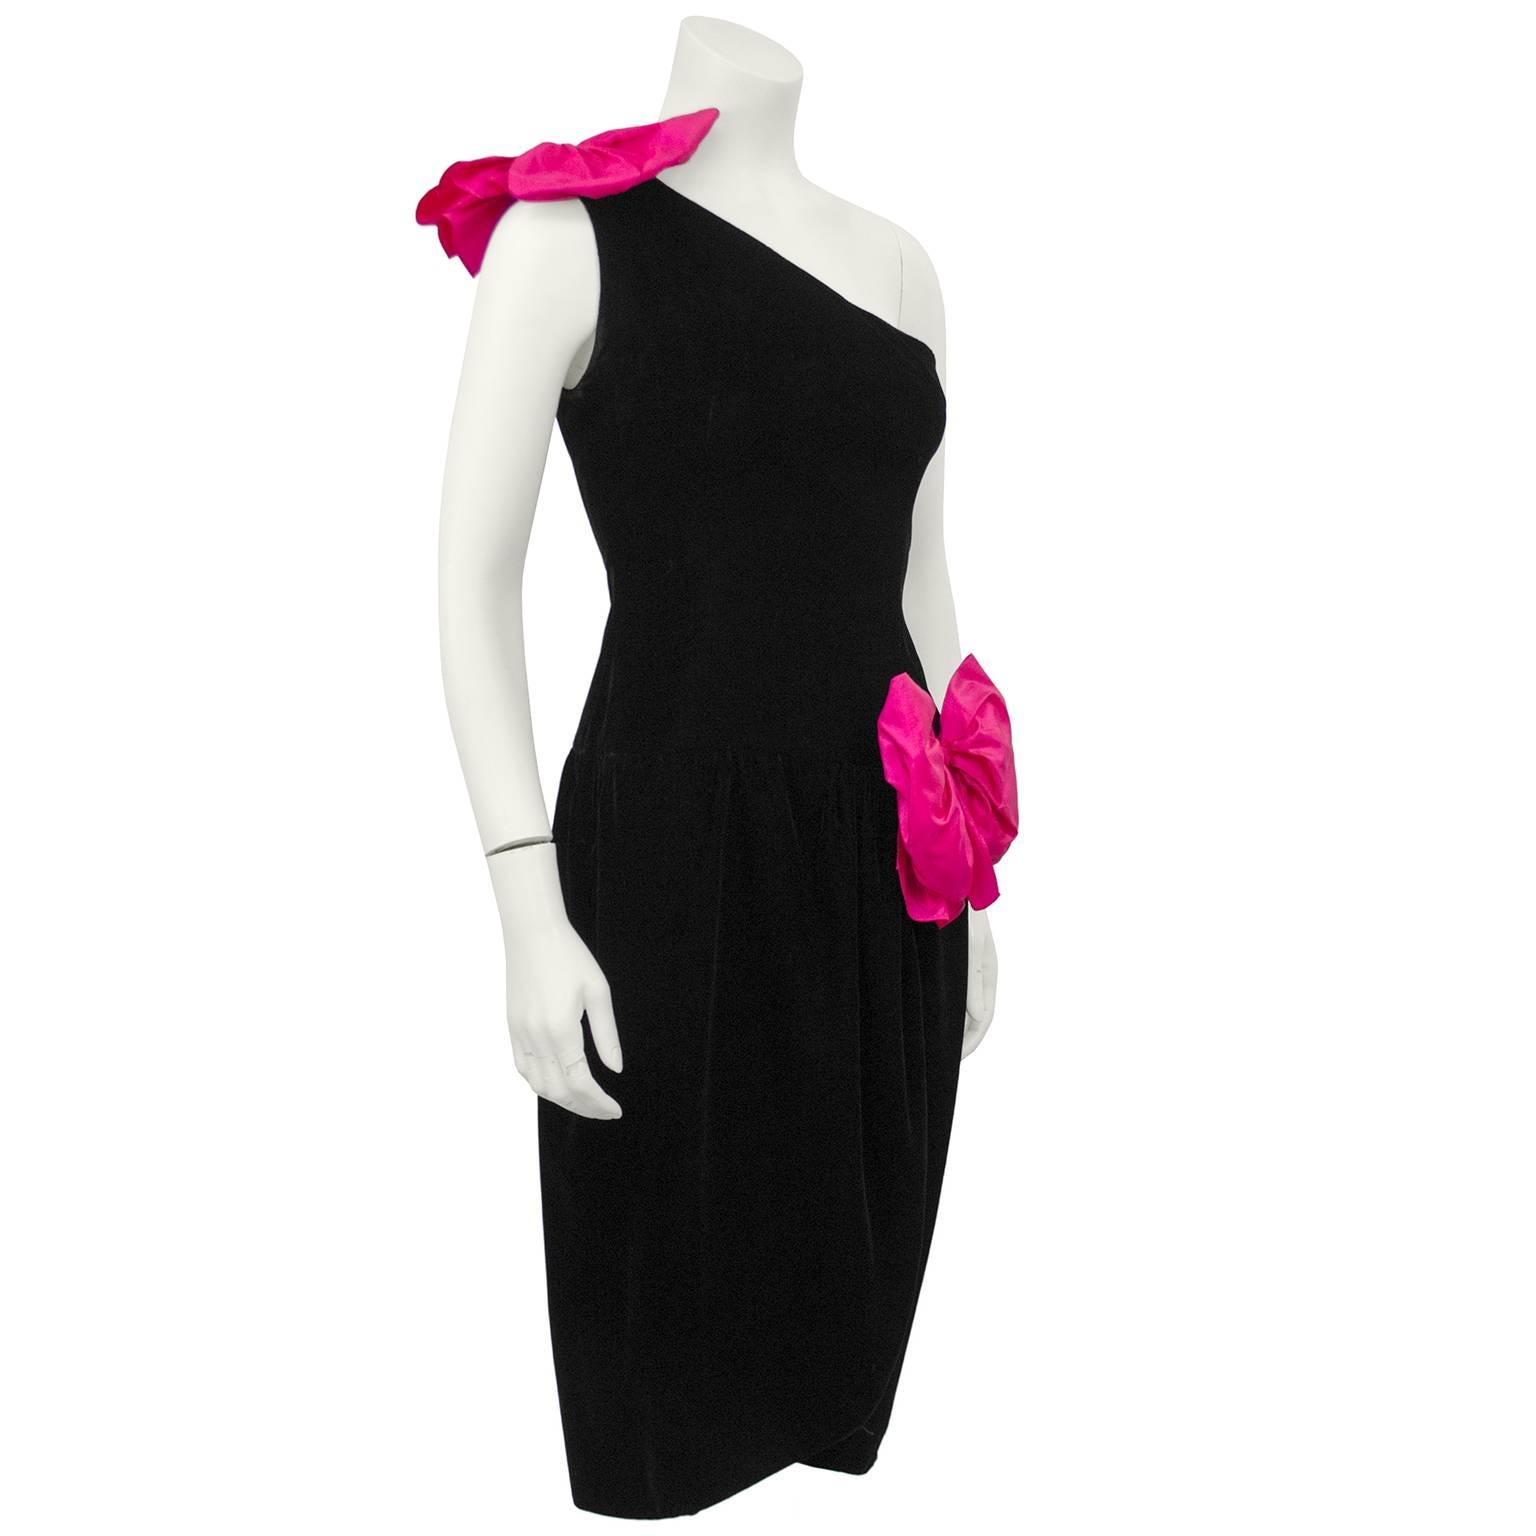 1980s Oscar de la Renta Miss O label black velvet cocktail dress with one shoulder accented with two large hot pink taffeta bows. Fitted through the body with a slightly gathered drop waist. Tulip style hemline and bow accent on the left hip and